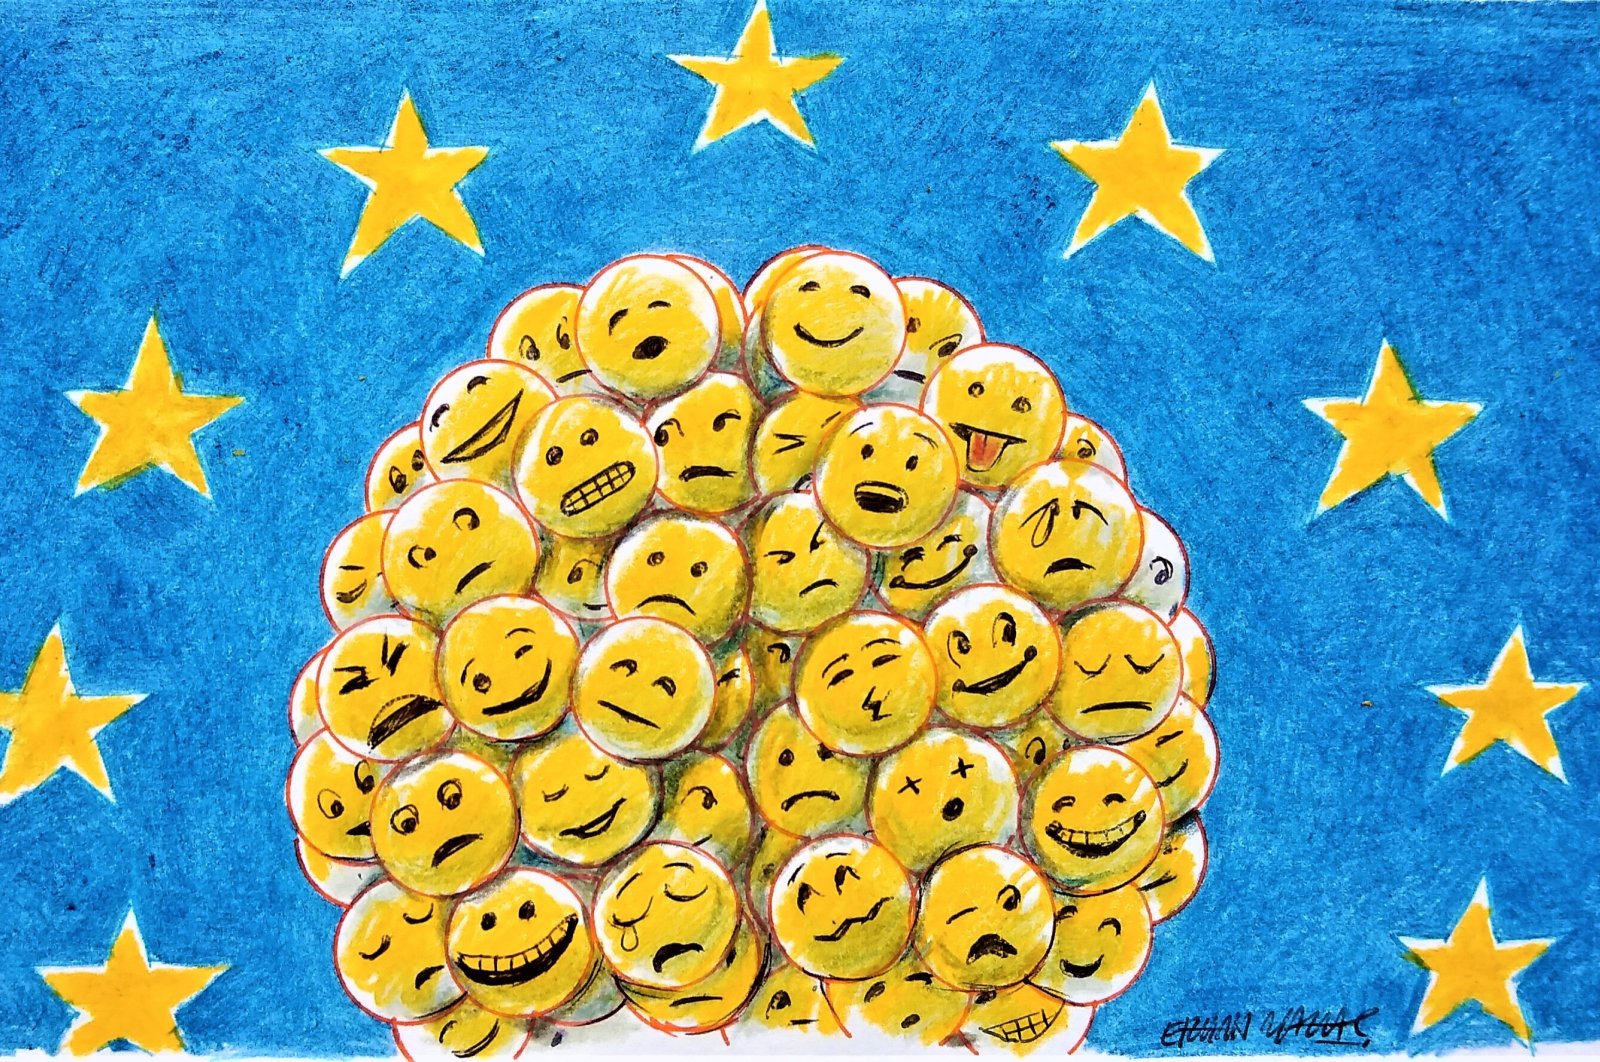 The European Mental Health Week, in particular, offers a forum for highlighting the importance of mental health to the European Union. (Illustration by Erhan Yalvaç)